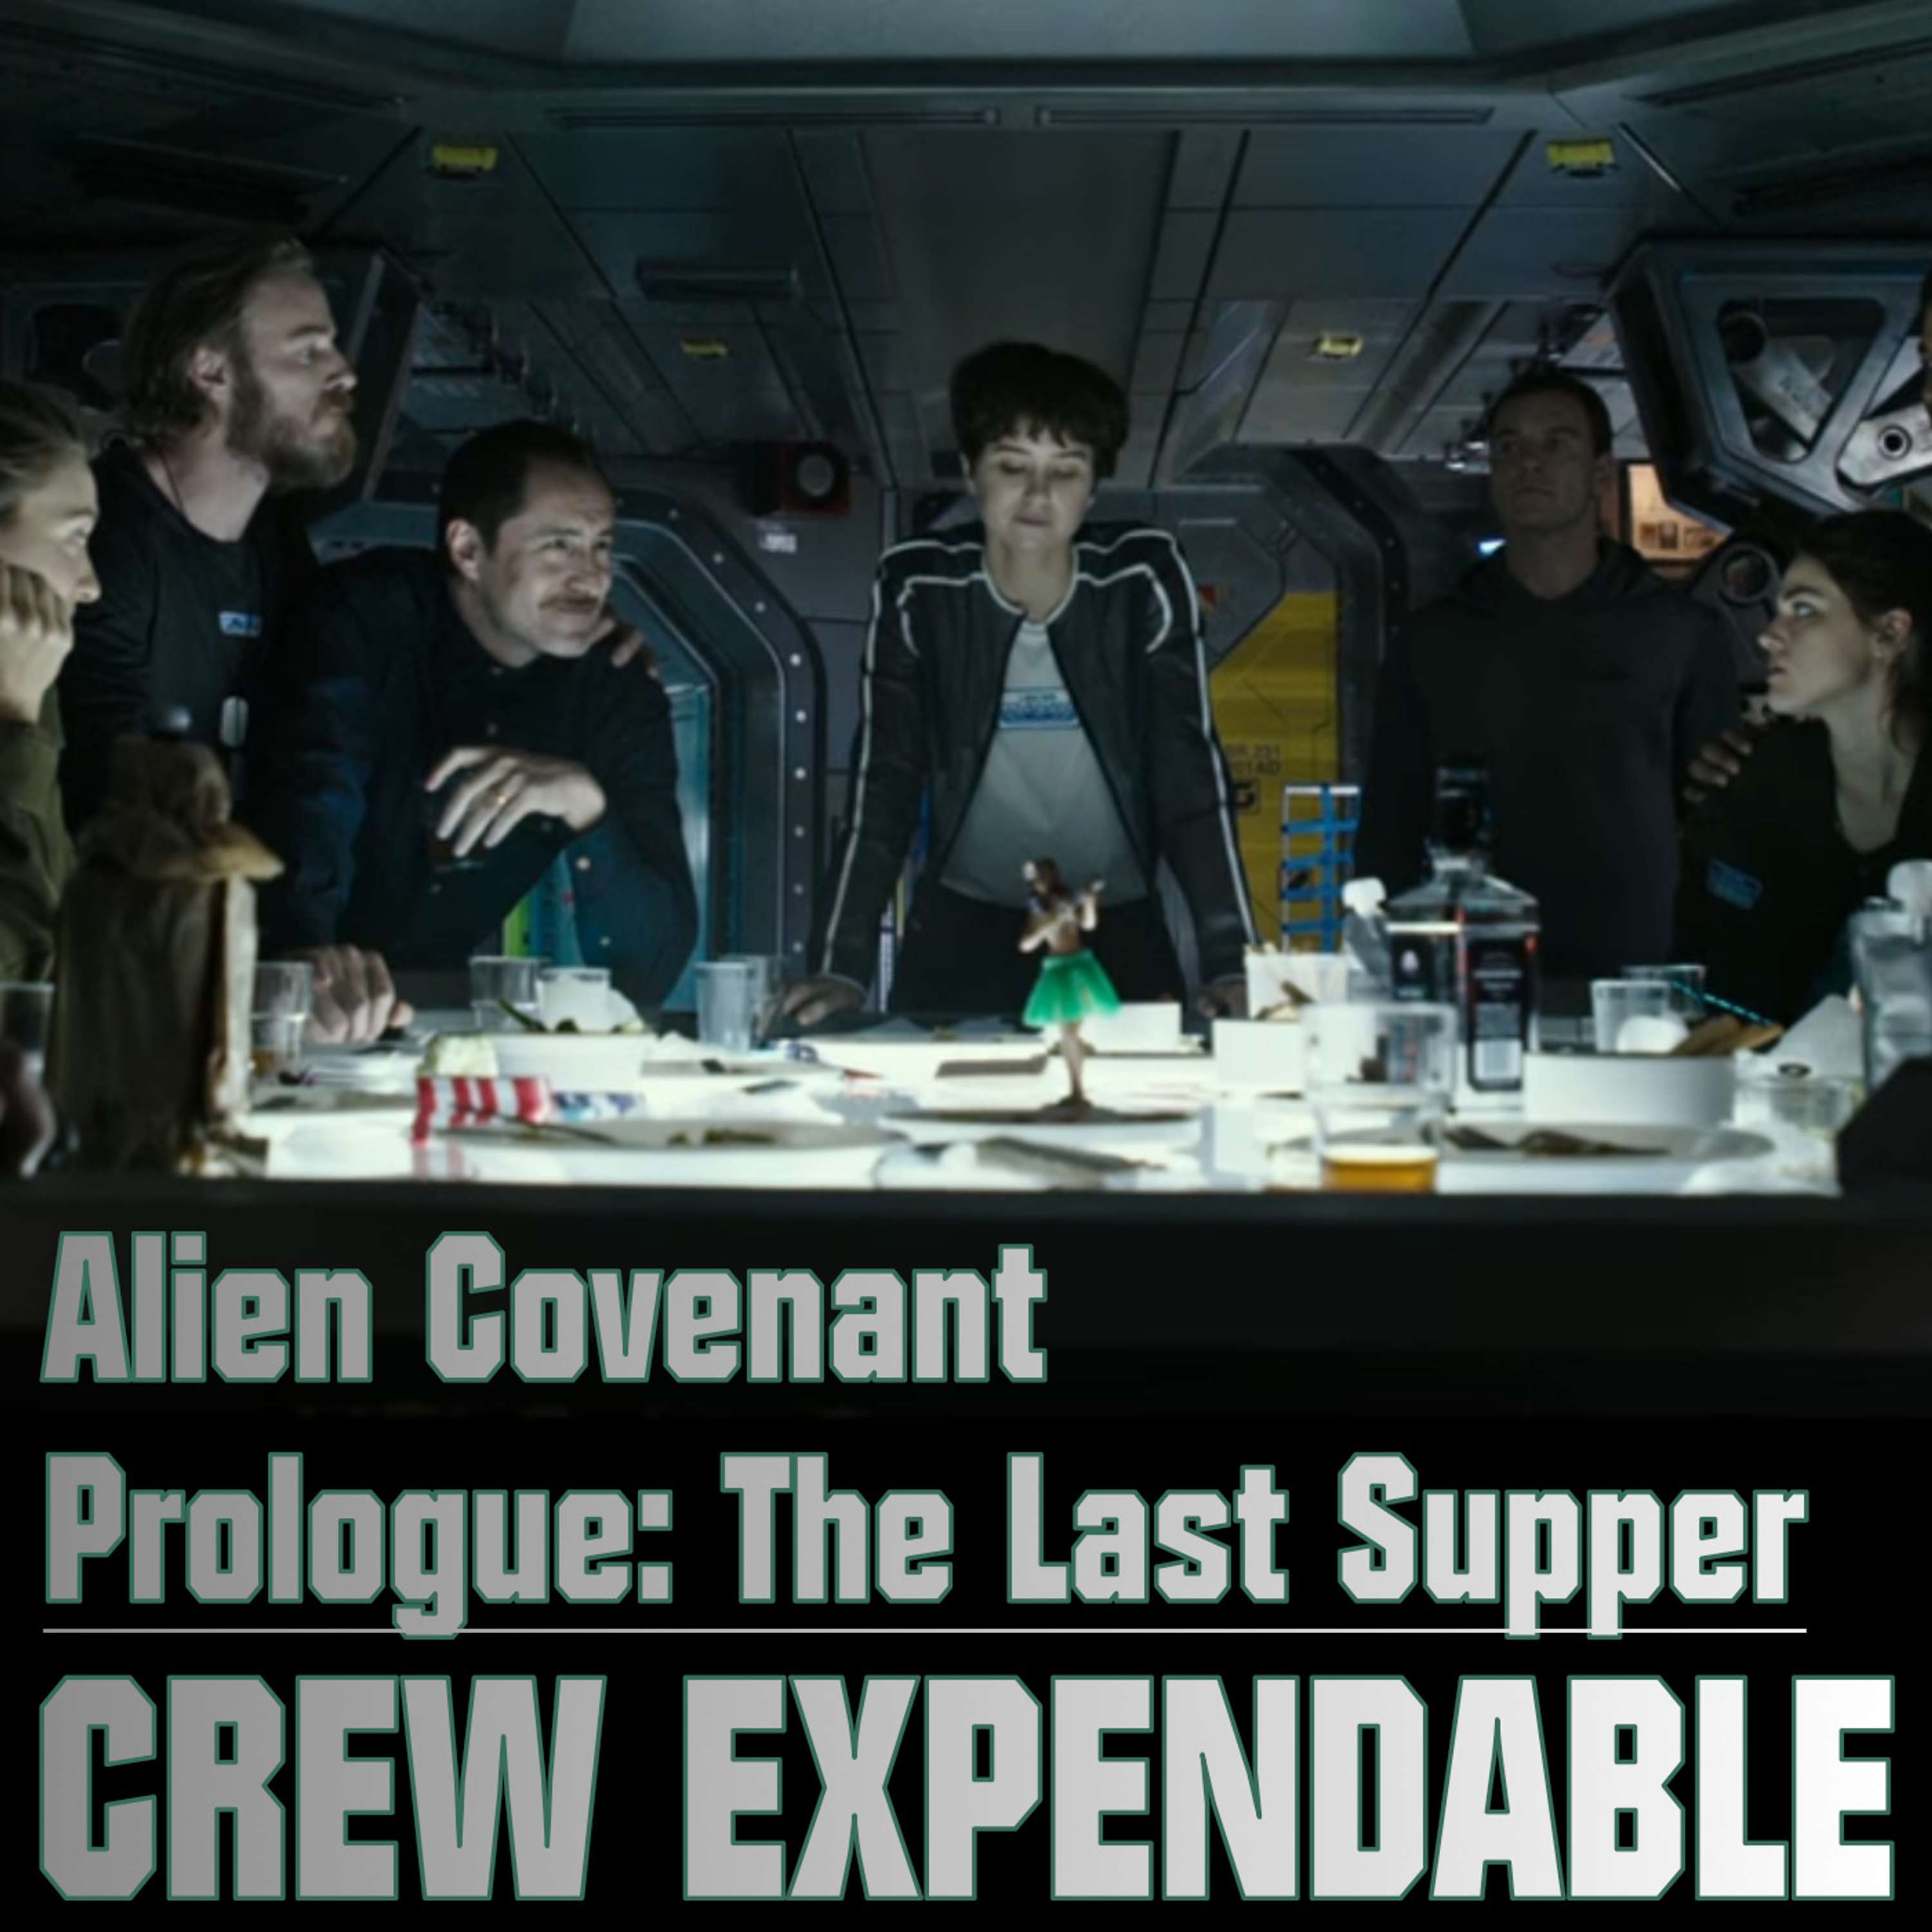 Discussing The Last Supper- The Alien: Covenant Prologue